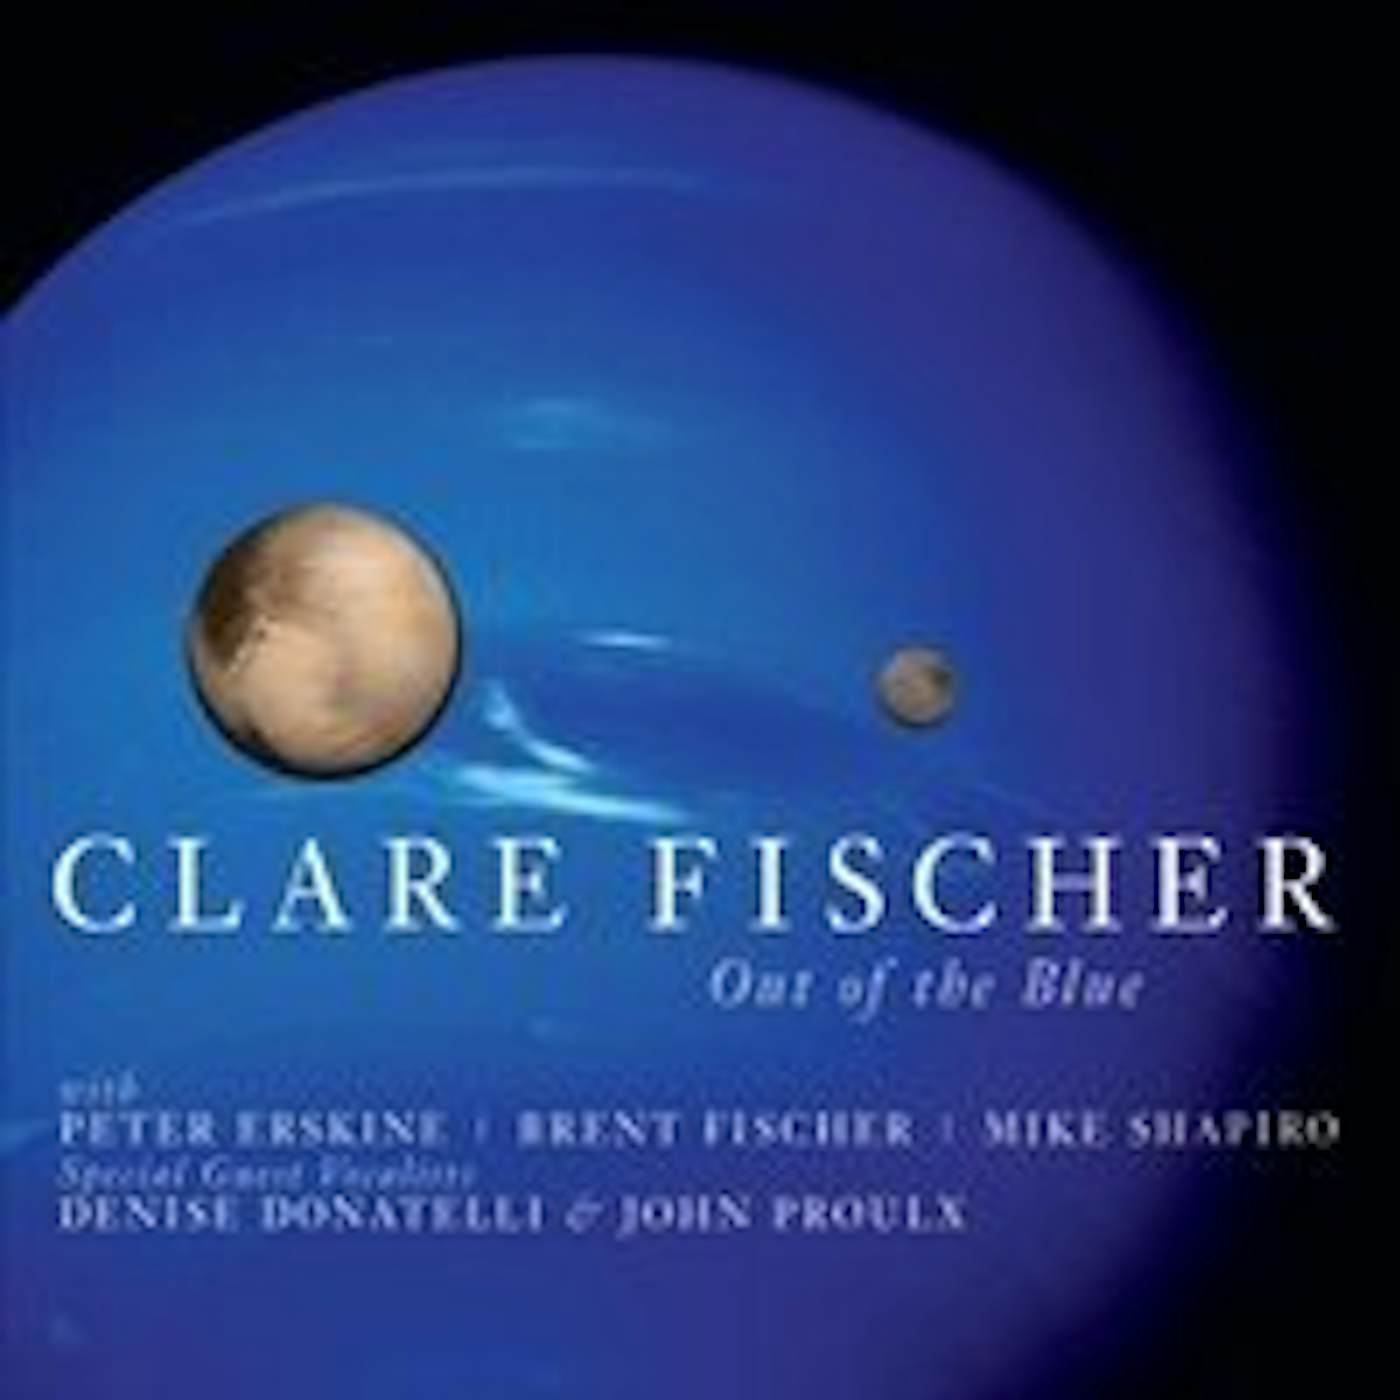 Clare Fischer OUT OF THE BLUE CD